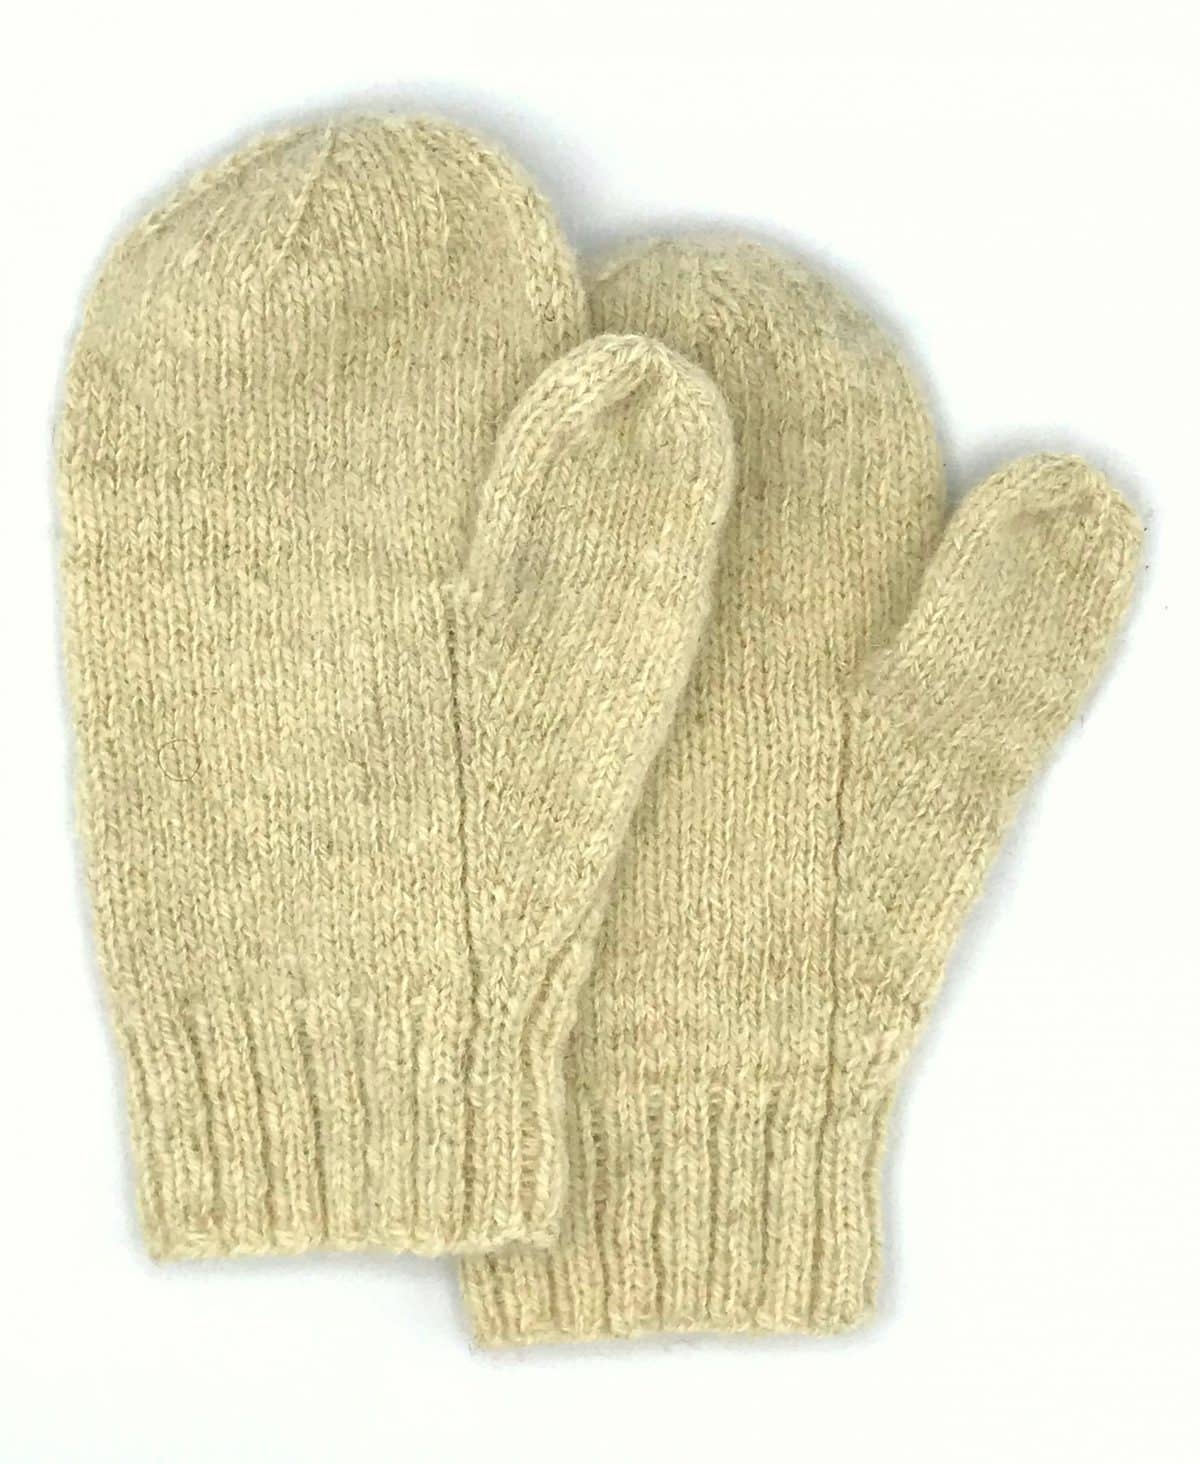 image description: a pair of handknit mittens worked in off-white wool, after felting